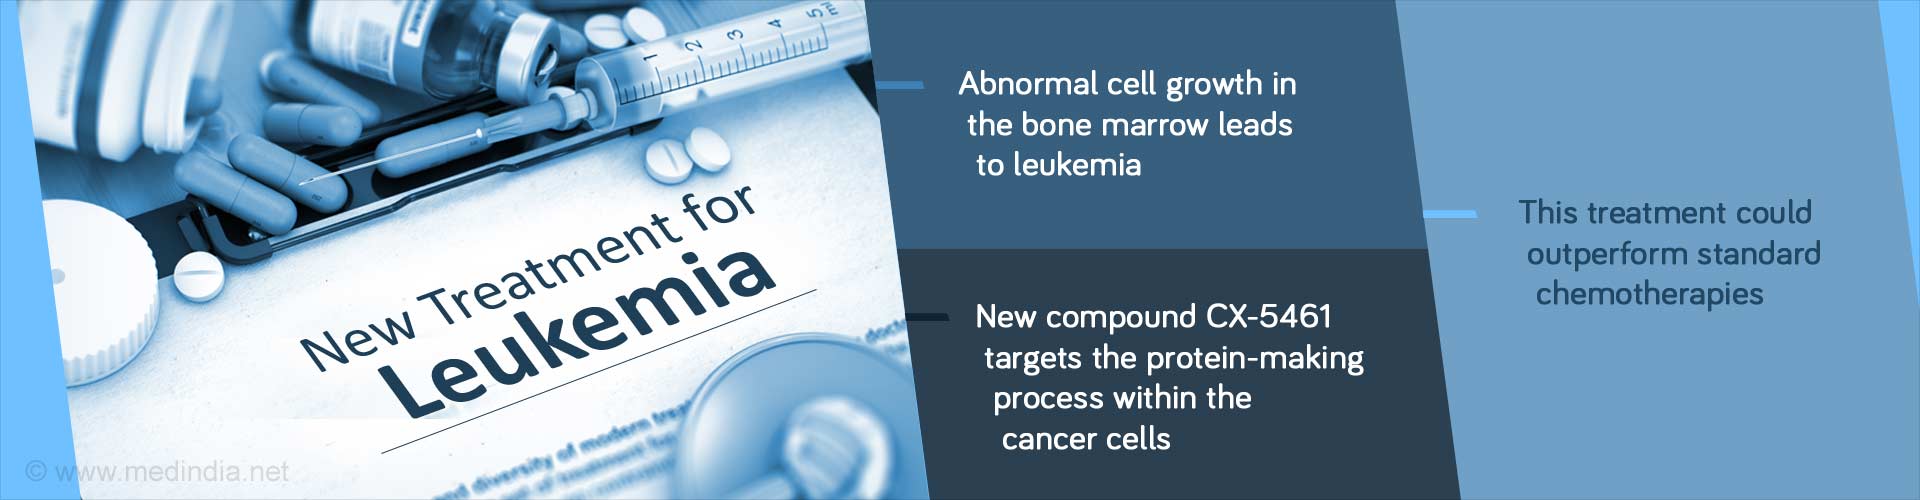 New Treatment for Leukemia
- Abnormal cell growth in the bone marrow leads to leukemia
- New compound CX-5461 targets the protein-making process within the caner cells
- This treatment could outperform standard chemotherapies